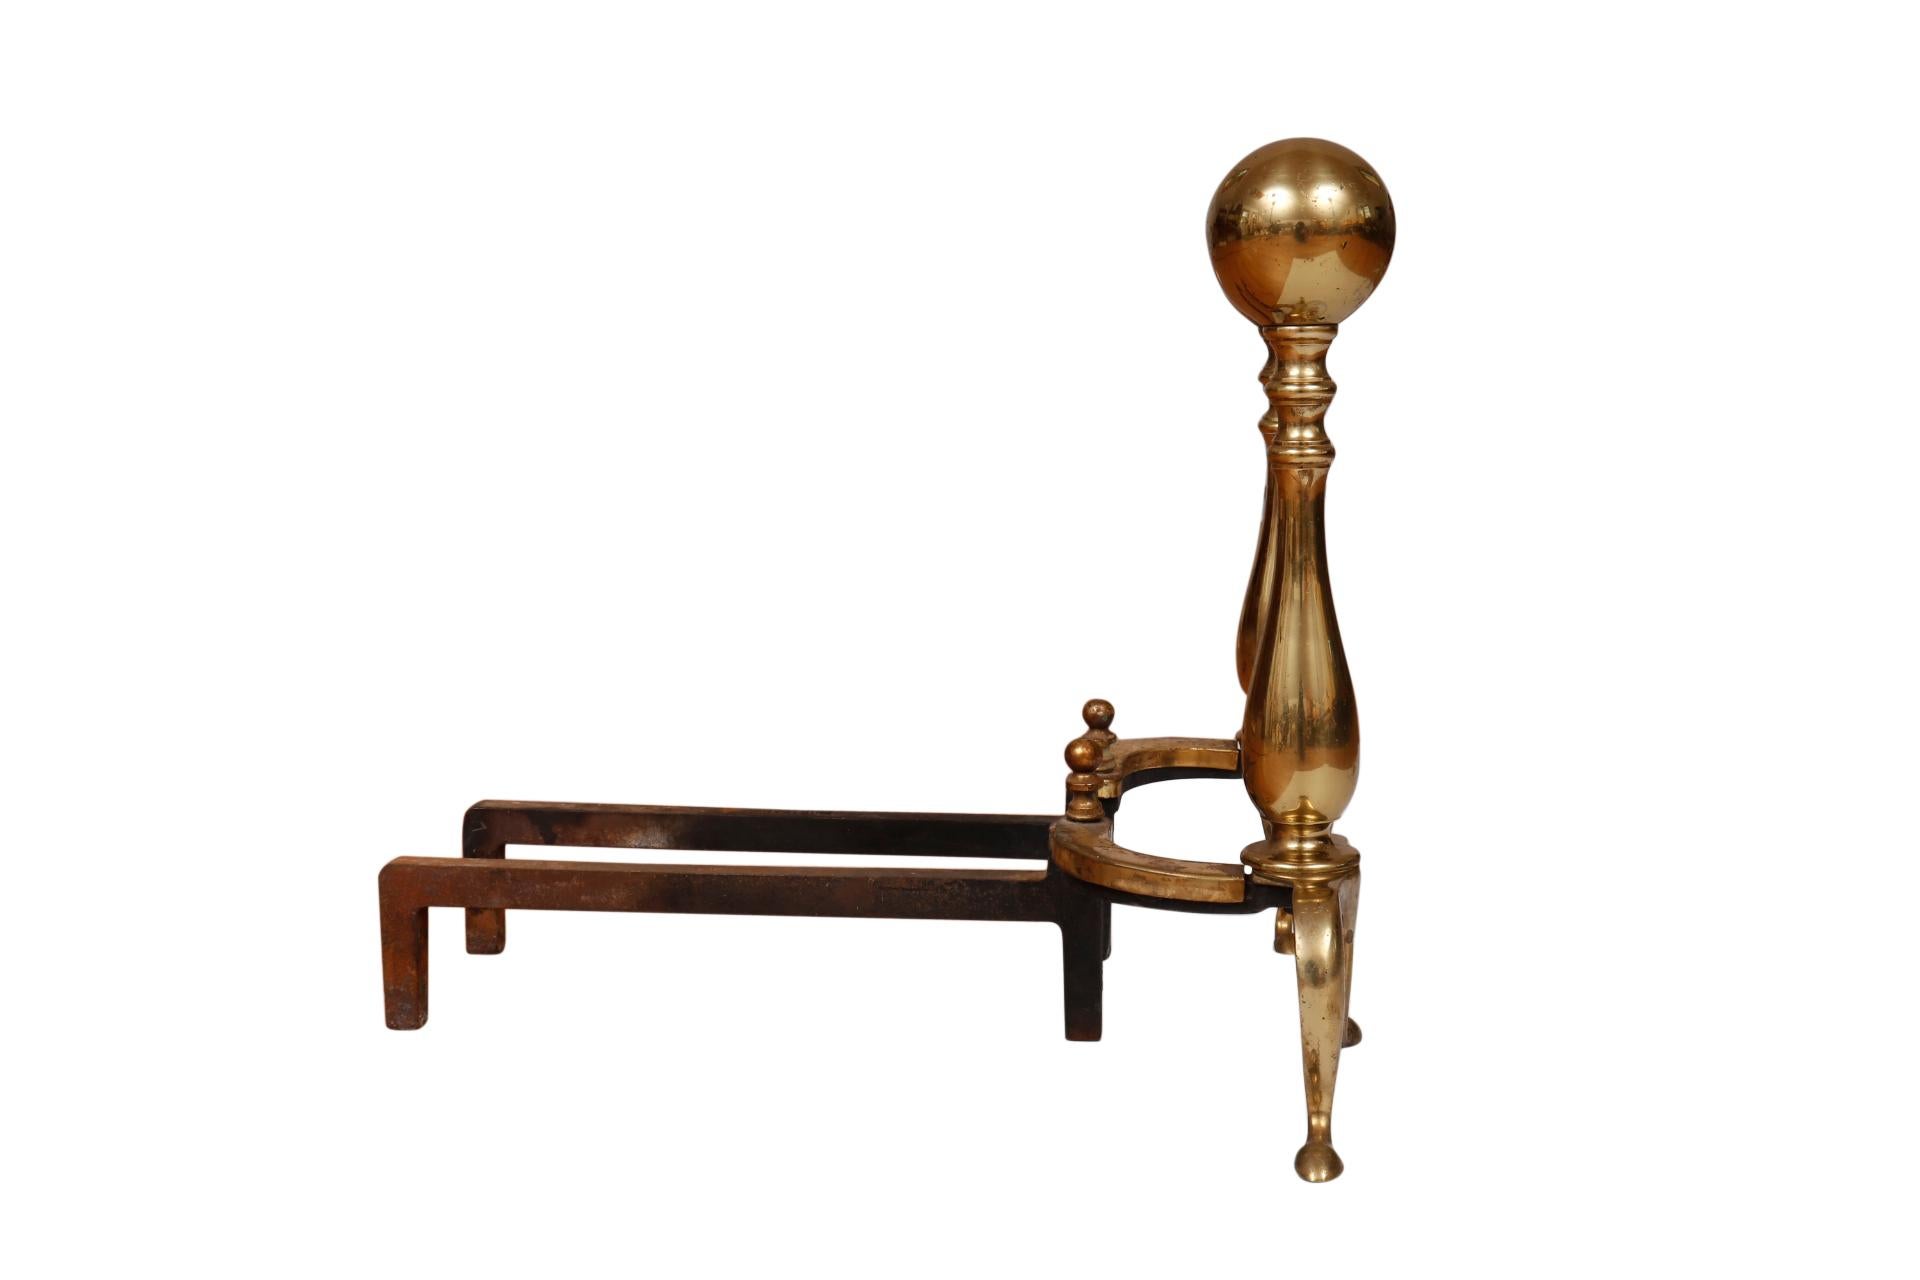 Rustic Puritan Ball Topped Brass Andirons, a Pair